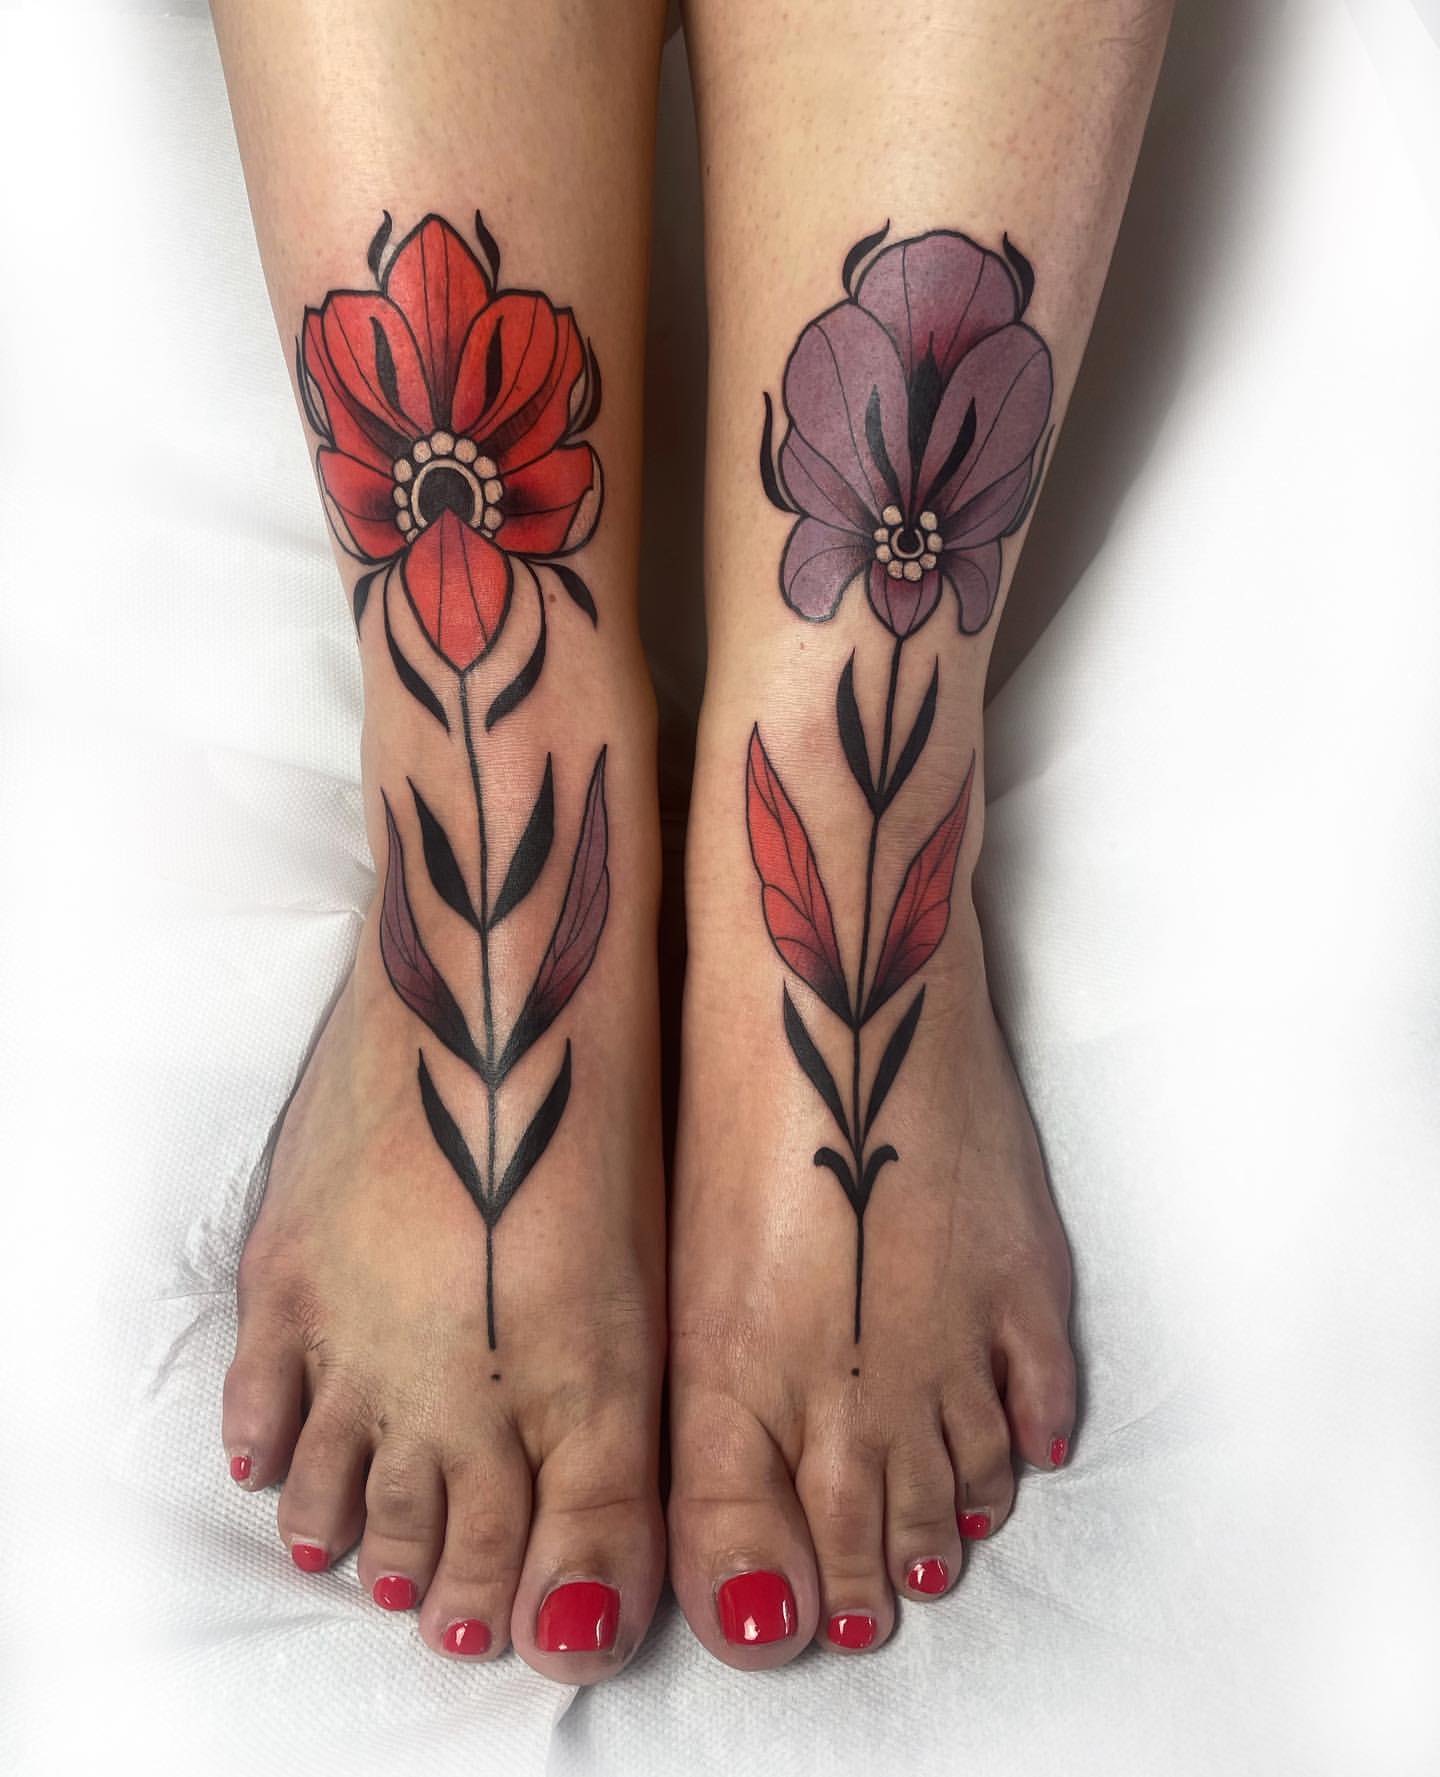 Foot Tattoos for Women 11